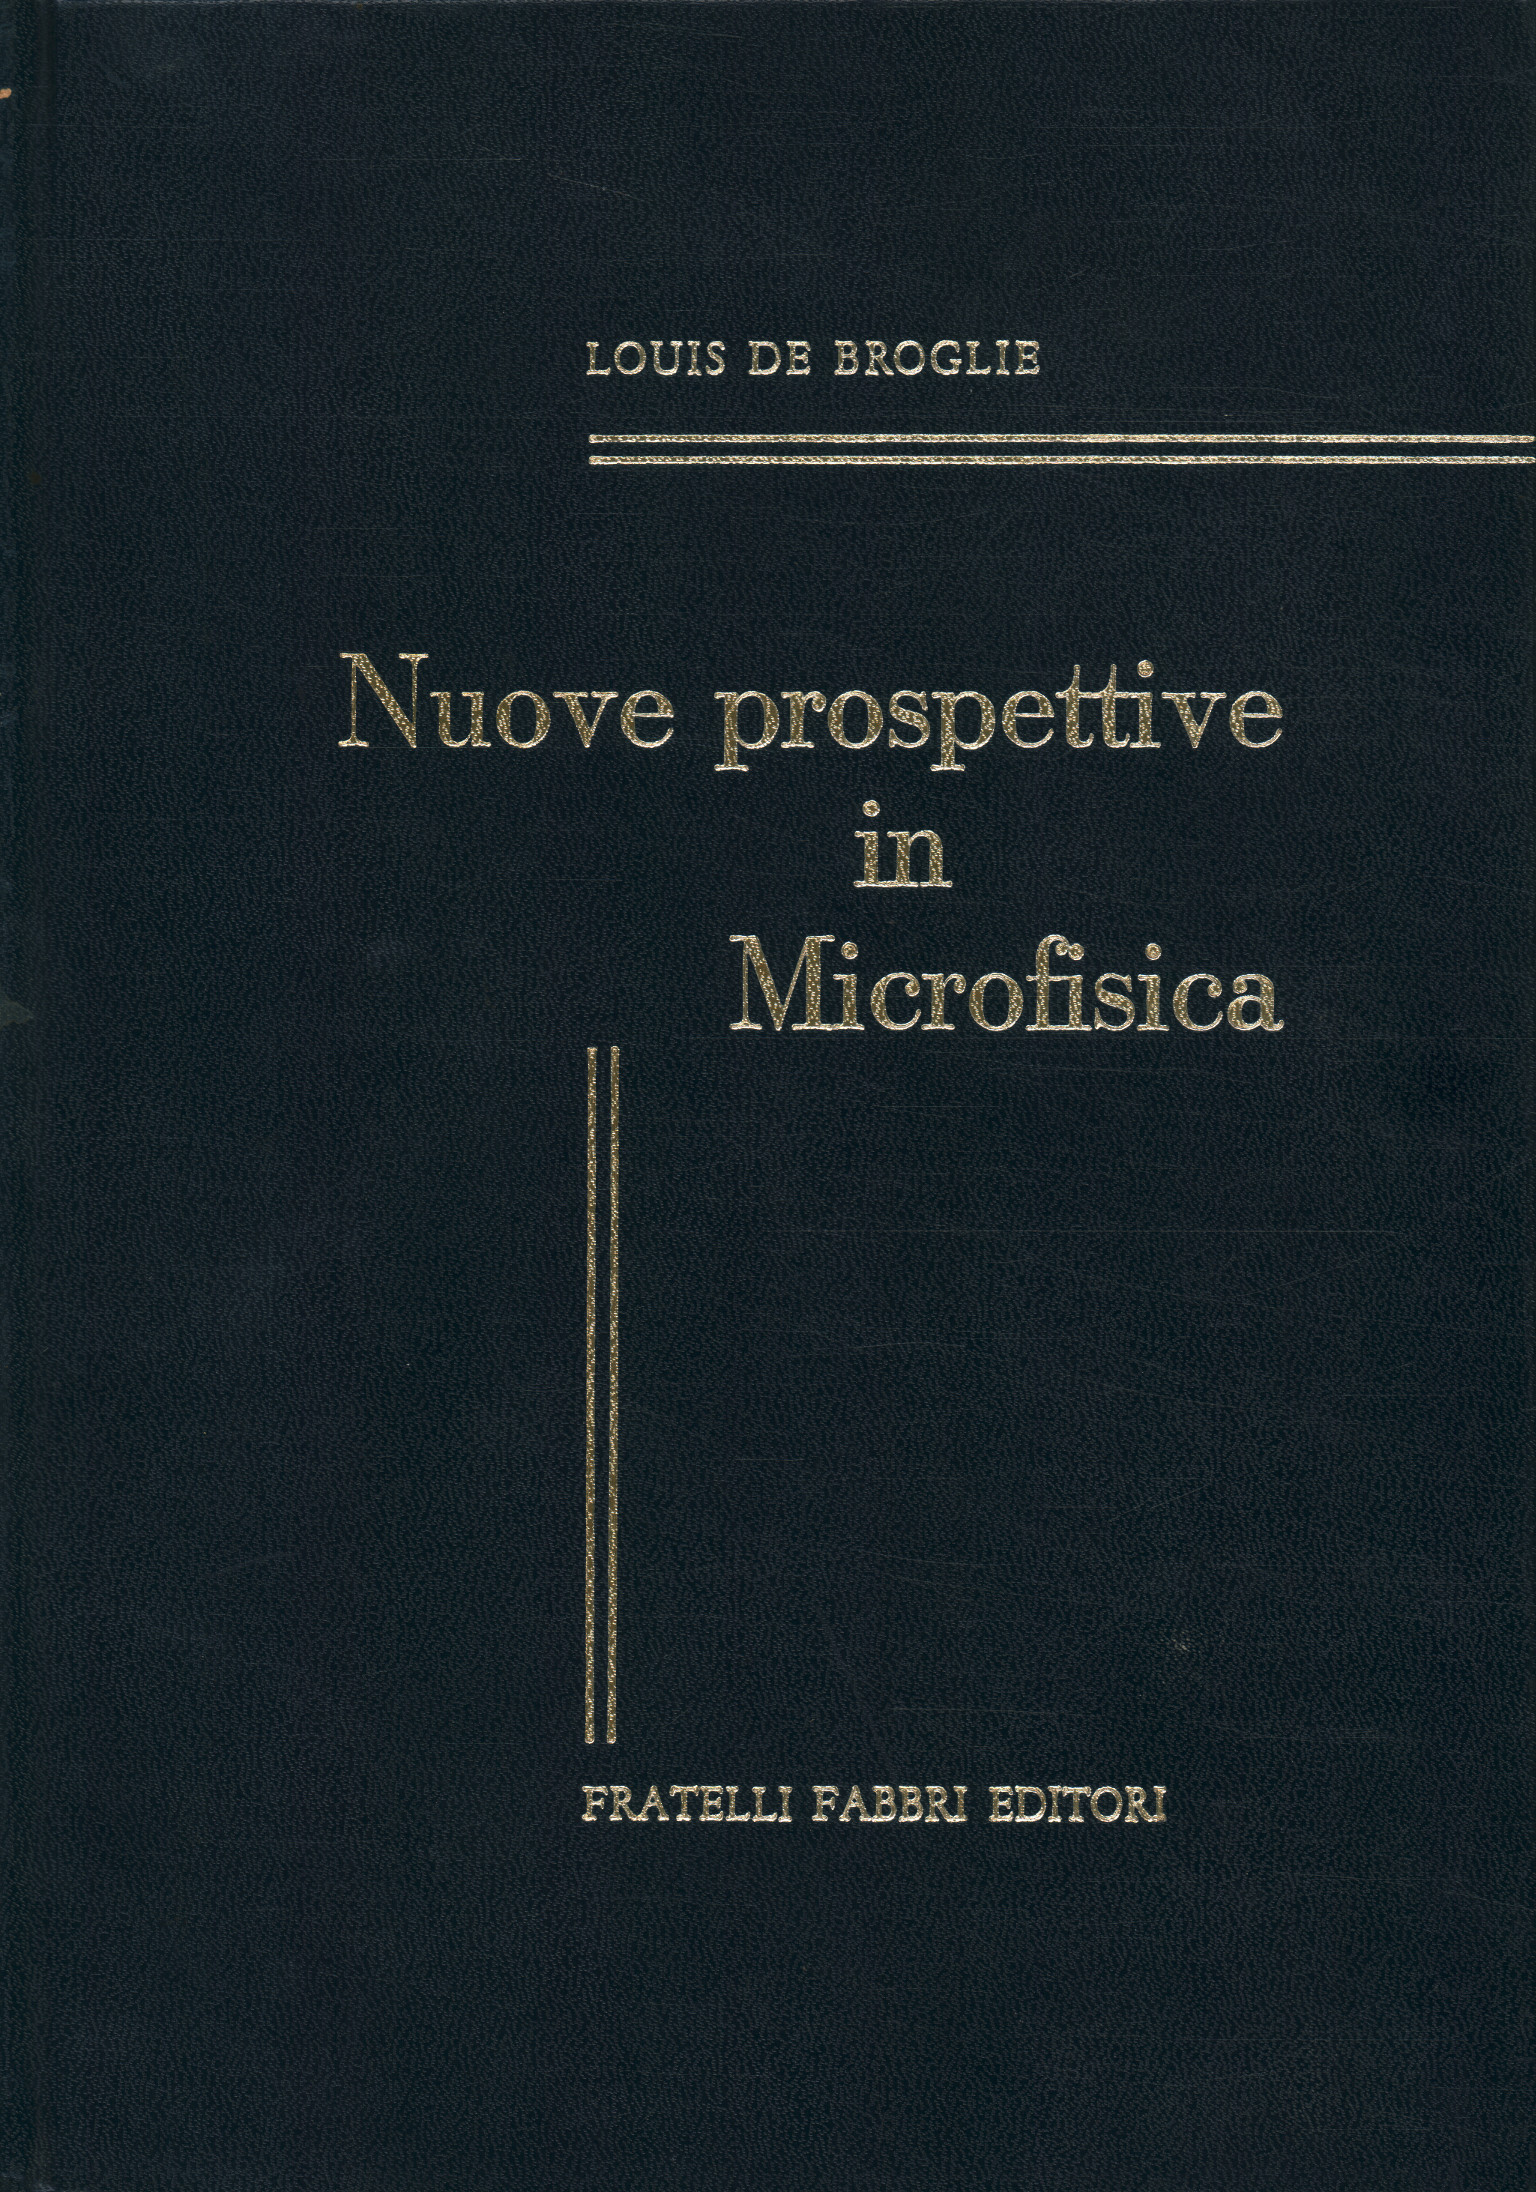 New perspectives in Microphysics